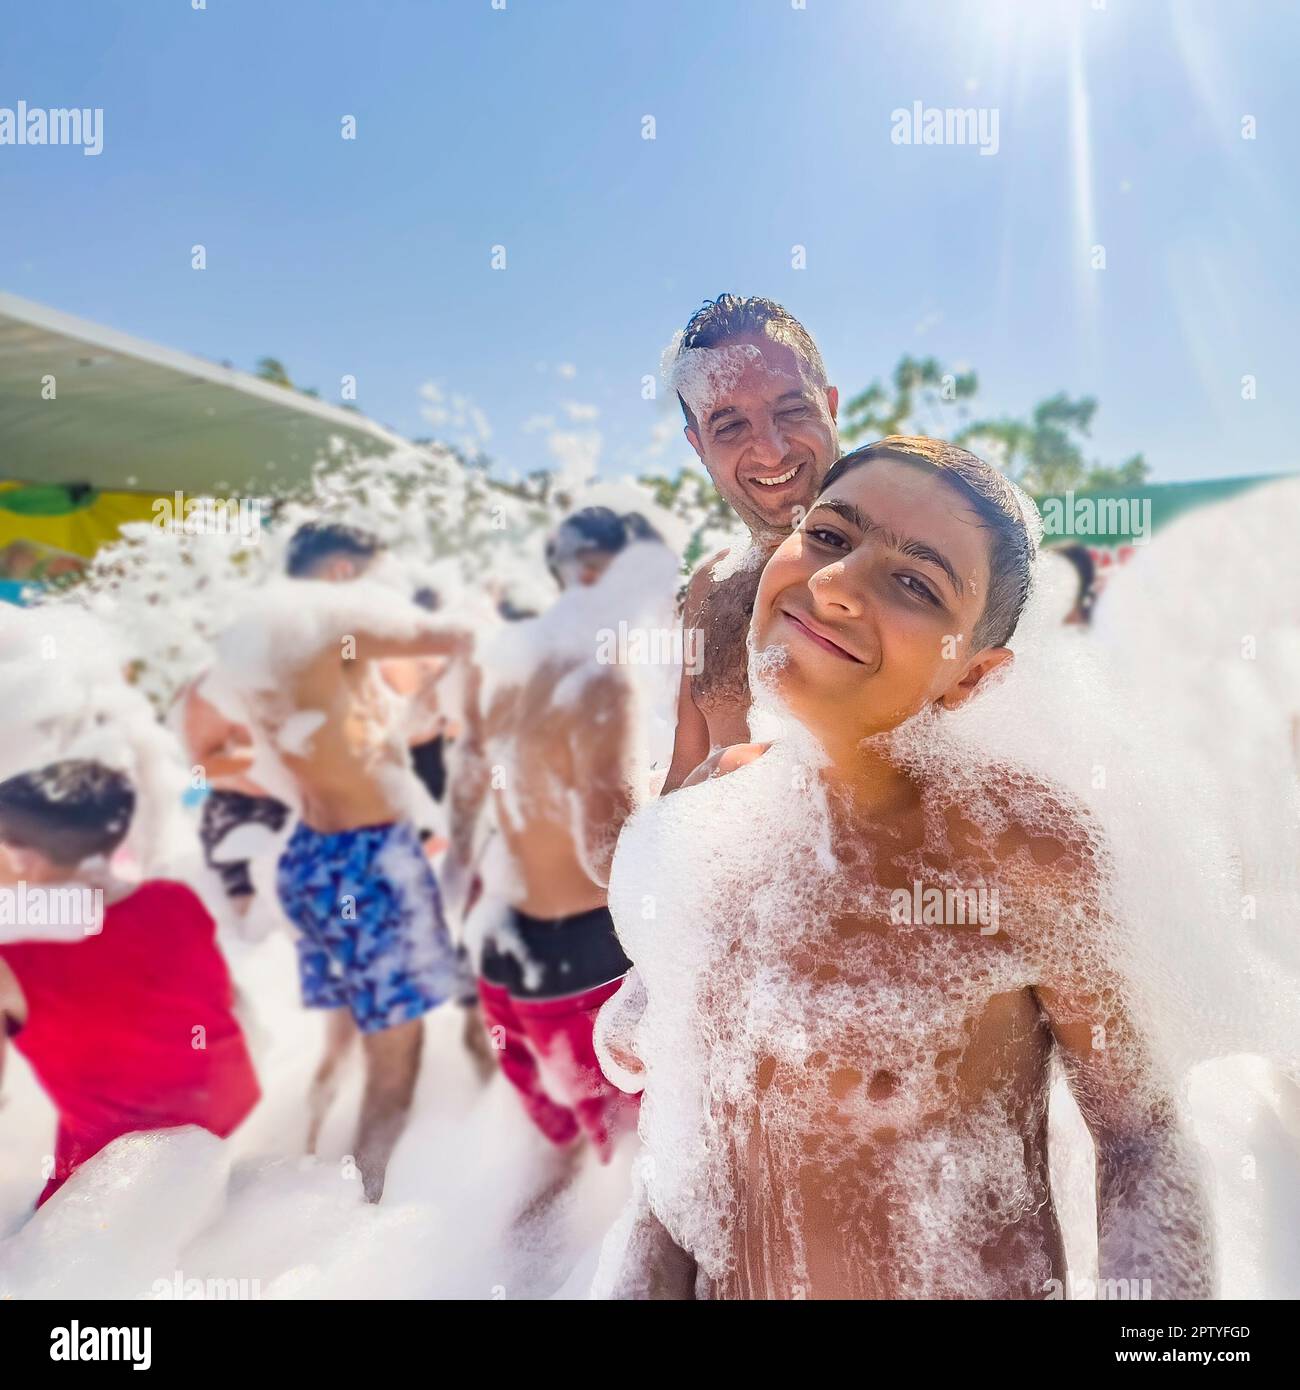 Father and son enjoying a day at the waterpark. Summer concept: Blurred unrecognizable people playing at foam pool party. Kids dancing at dance floor Stock Photo